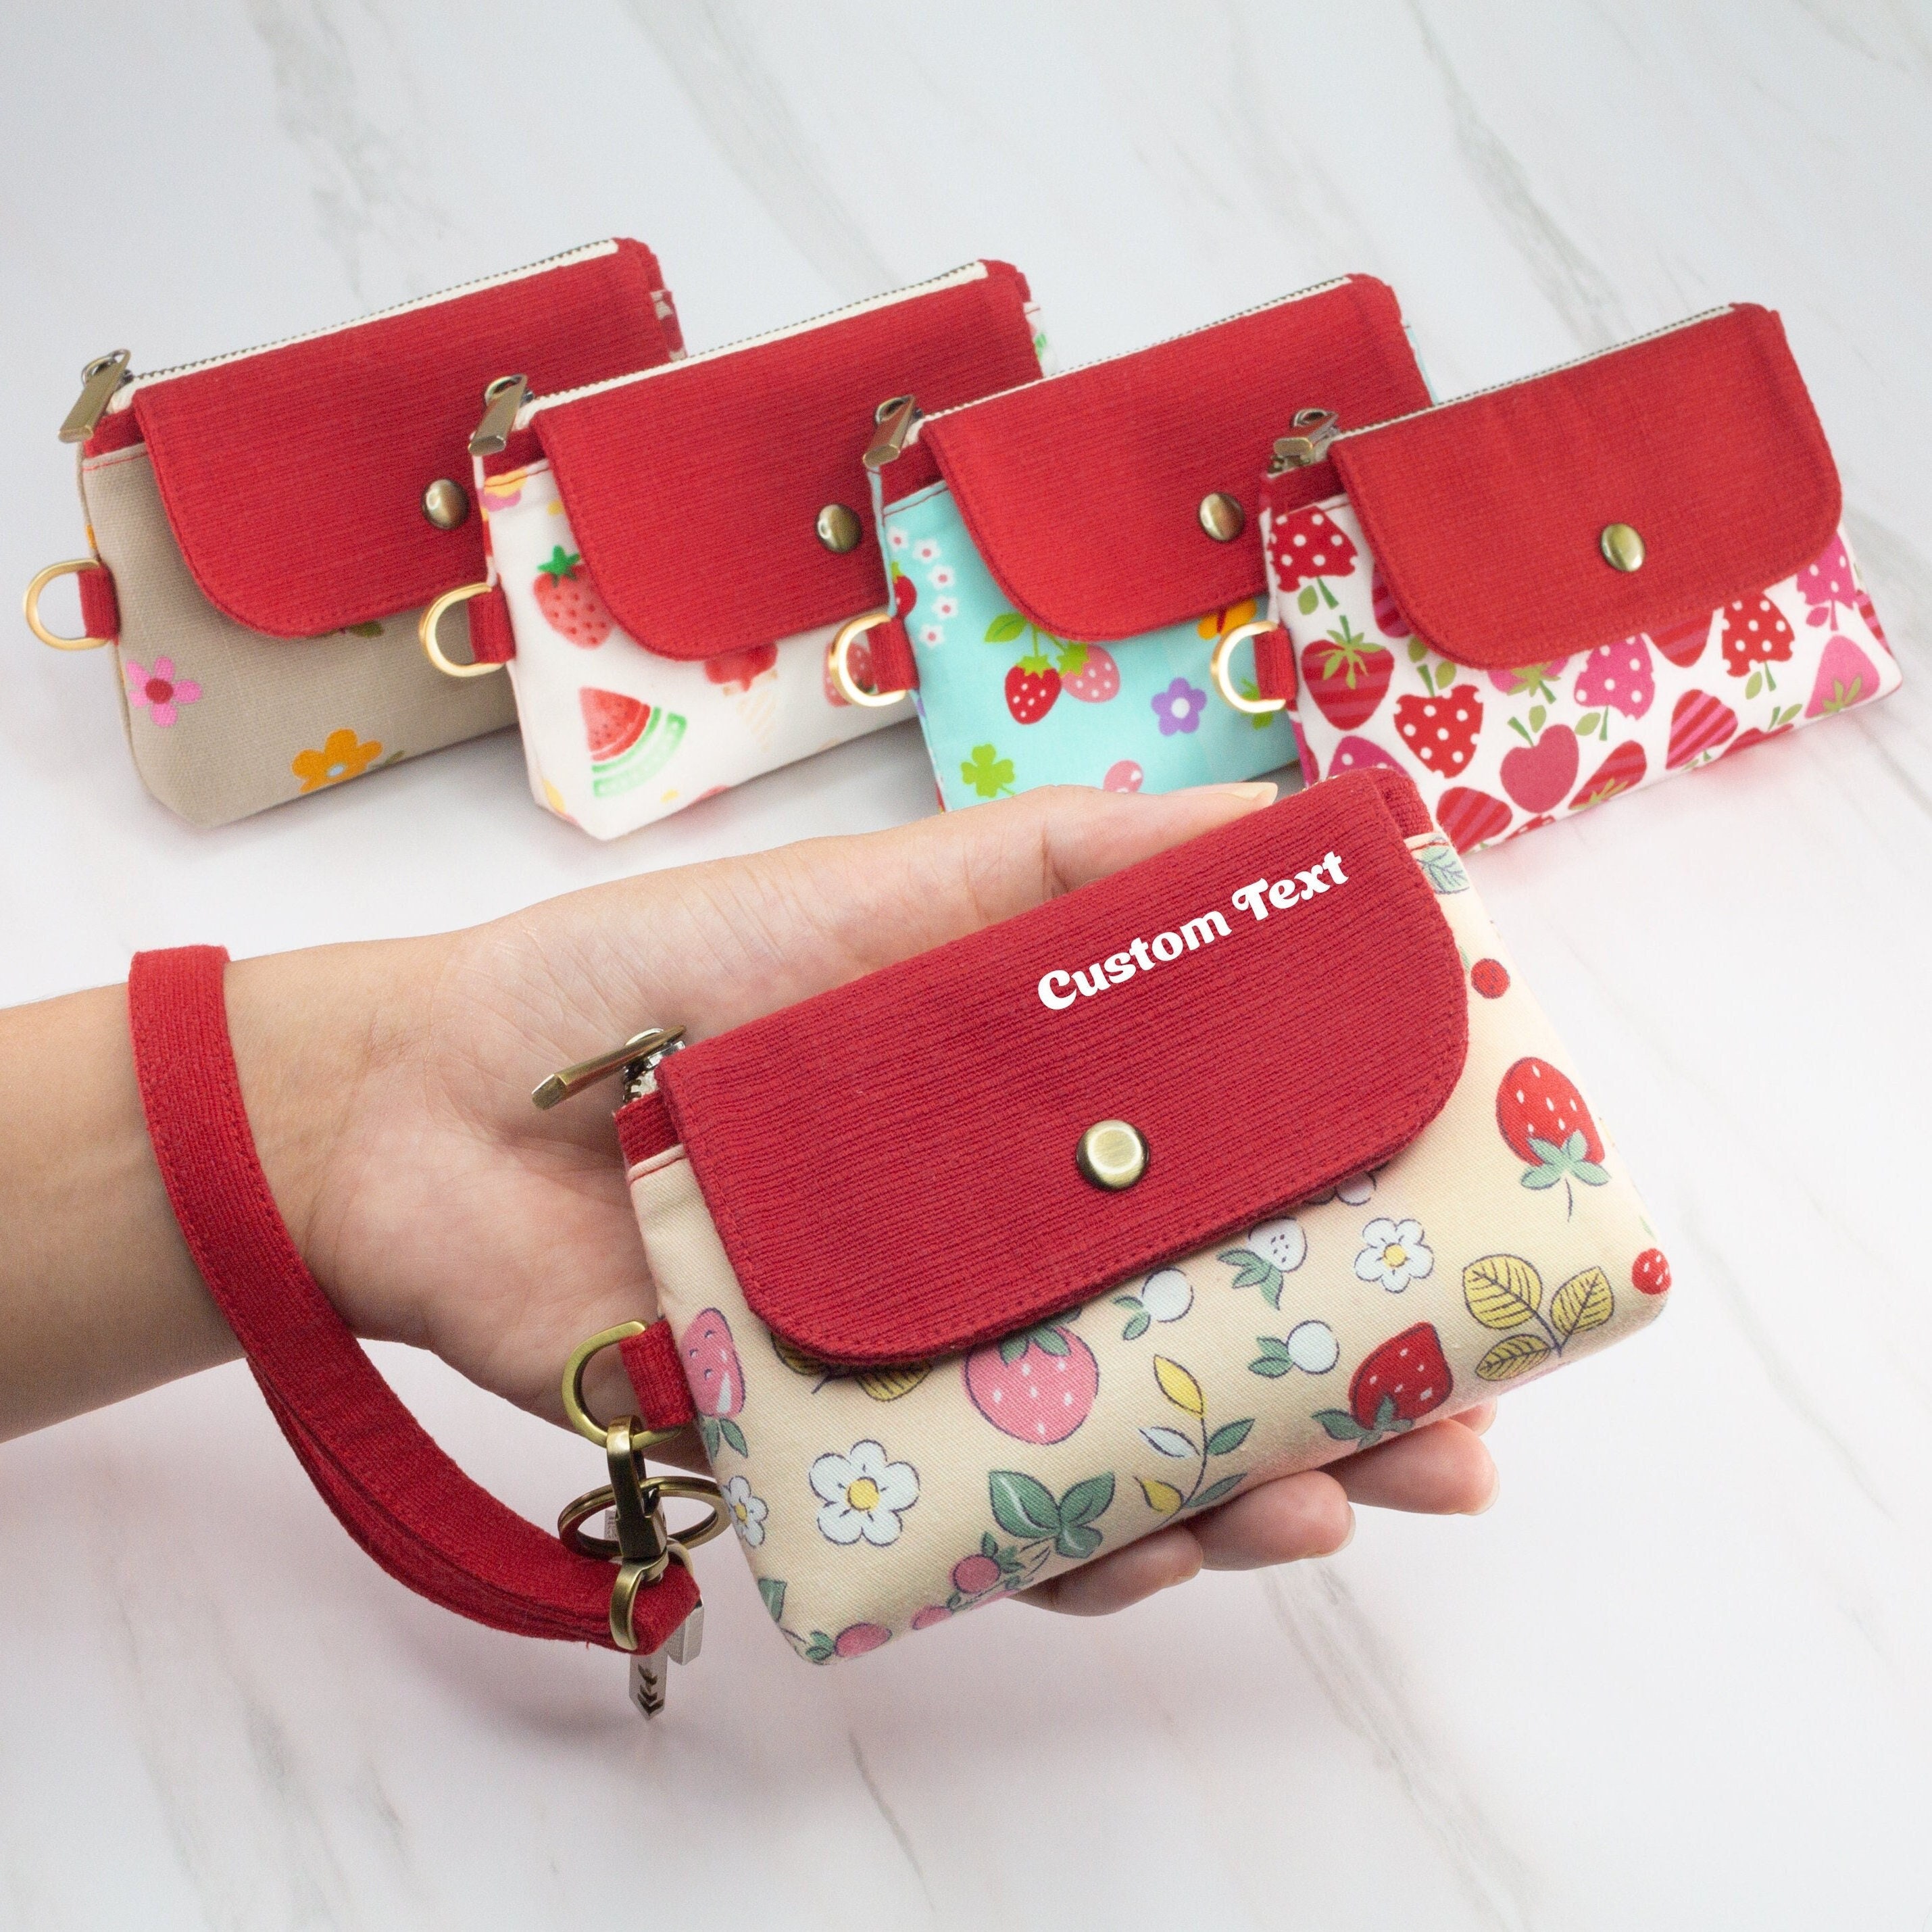 Nawoshow Women Cute Small Wallet Cherry Pattern Coin Purse Card Holder  Clutch Bag